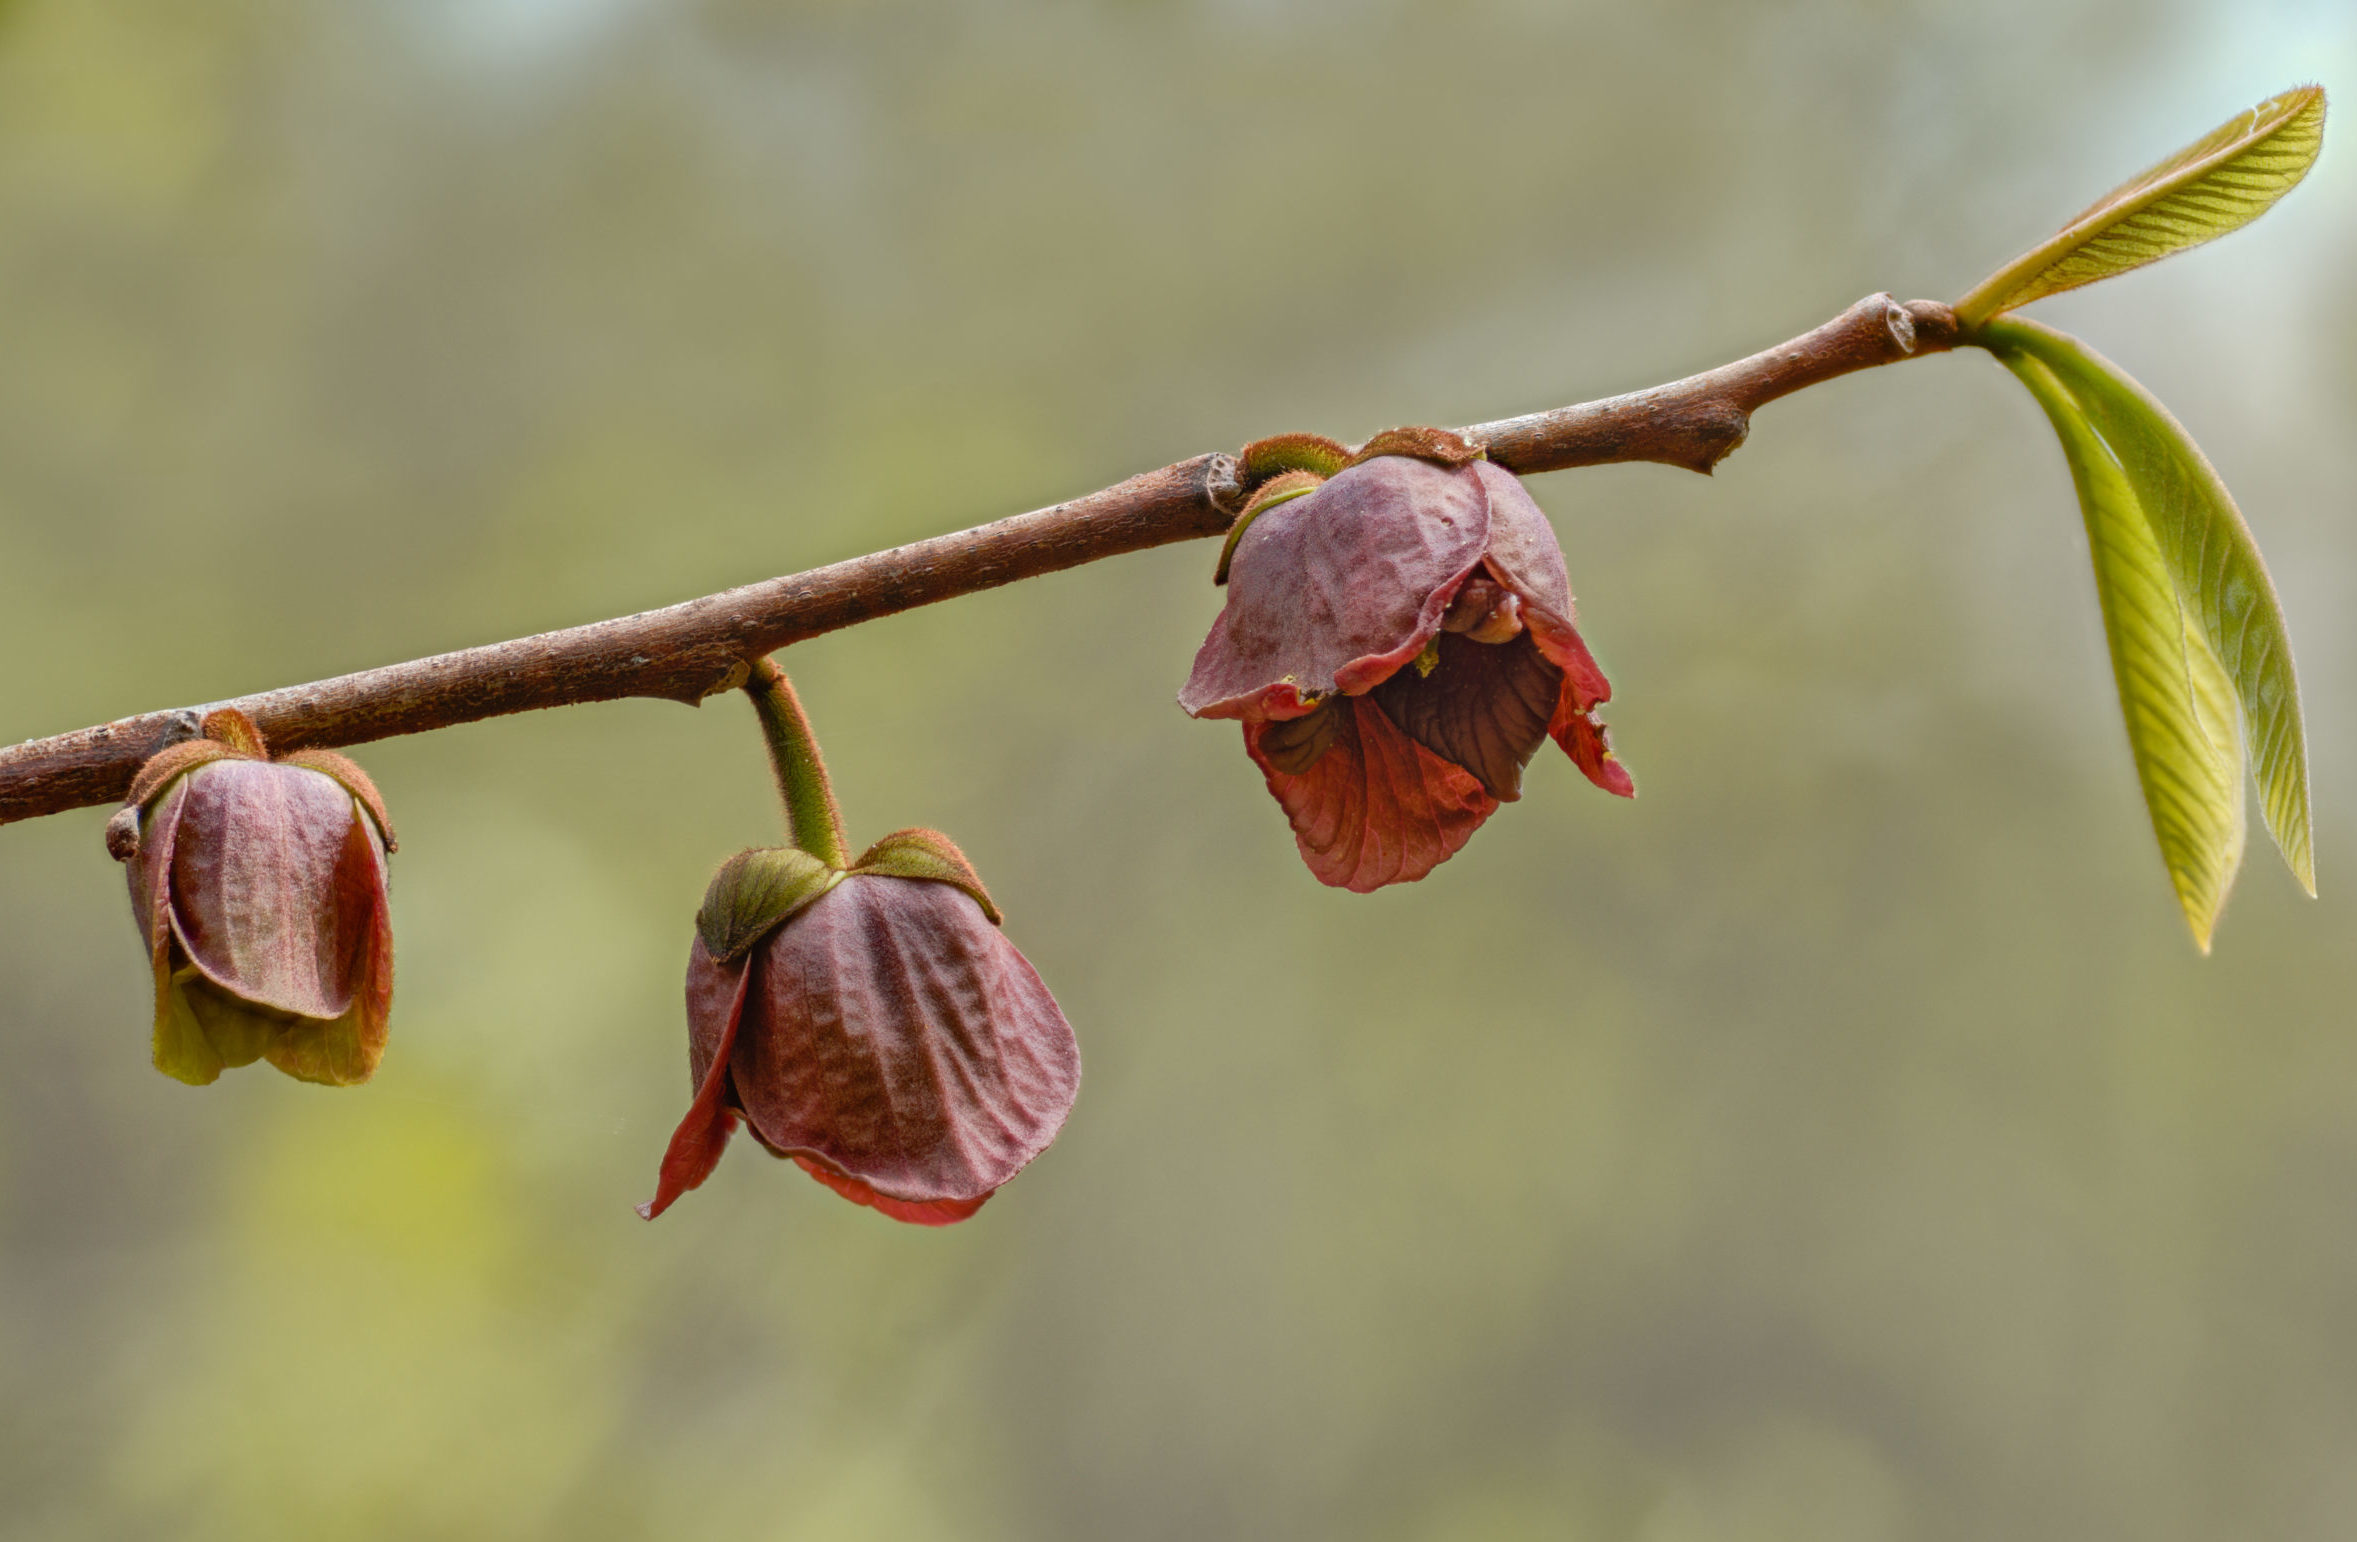 Flowers and first leaves of pawpaw tree (Asimina triloba) in forest of Shenandoah National Park in Virginia